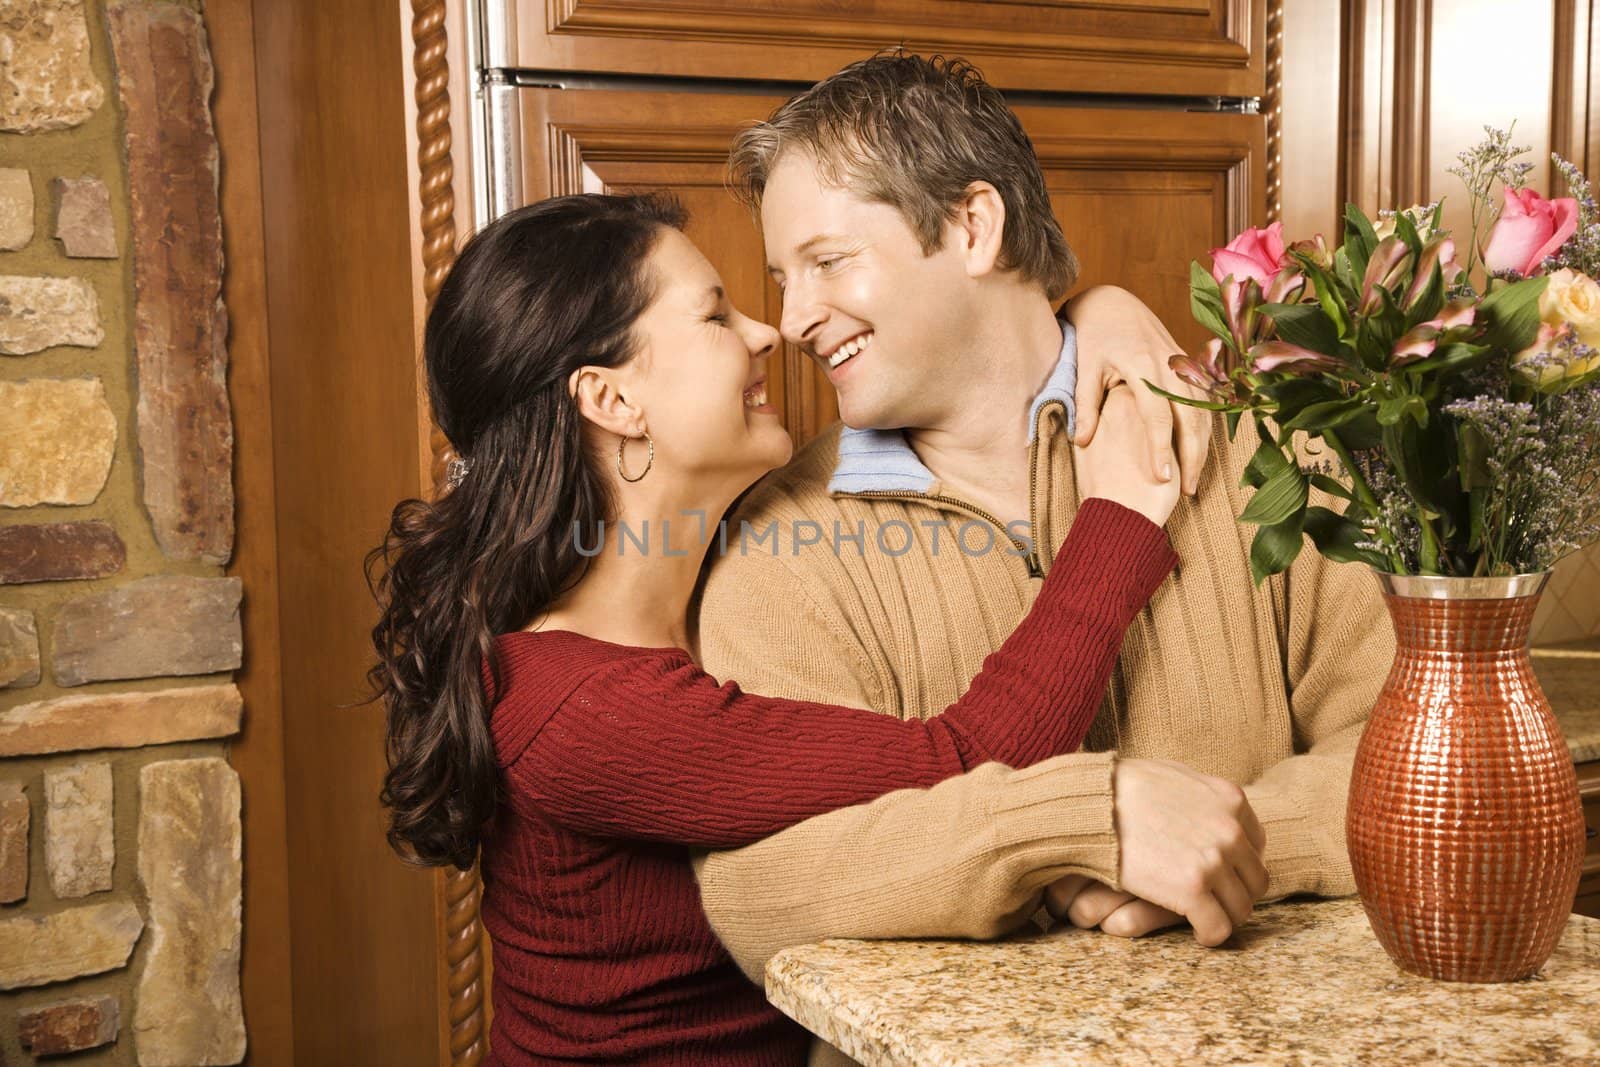 Caucasian woman with arms around Caucasian man smiling at each other in kitchen.